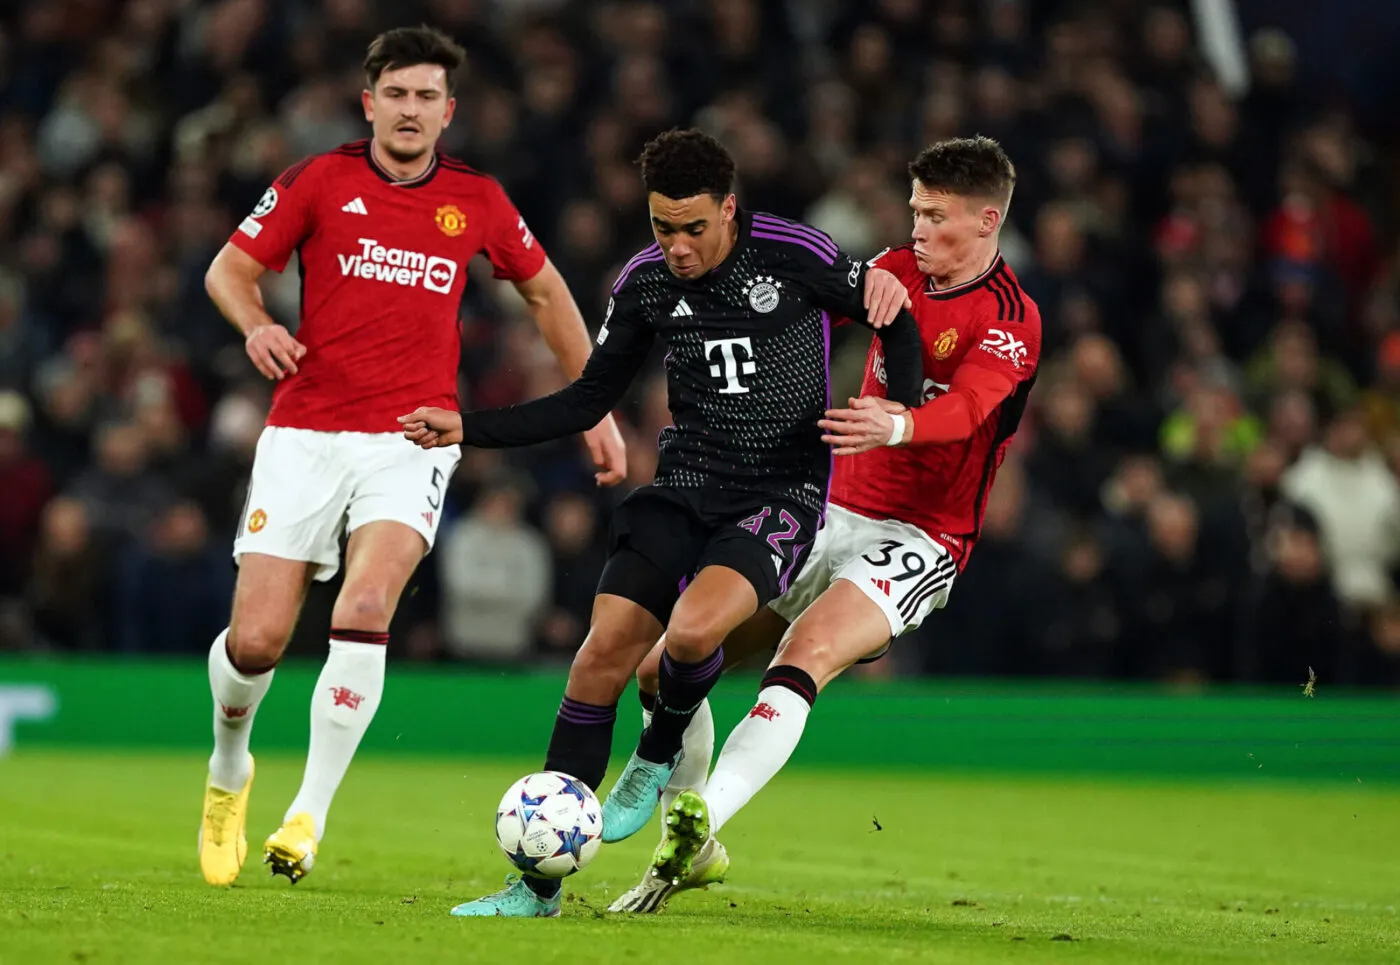 Bayern Munich's Jamal Musiala and Manchester United's Scott McTominay (right) battle for the ball during the UEFA Champions League, Group A match at Old Trafford, Manchester. Picture date: Tuesday December 12, 2023. - Photo by Icon sport